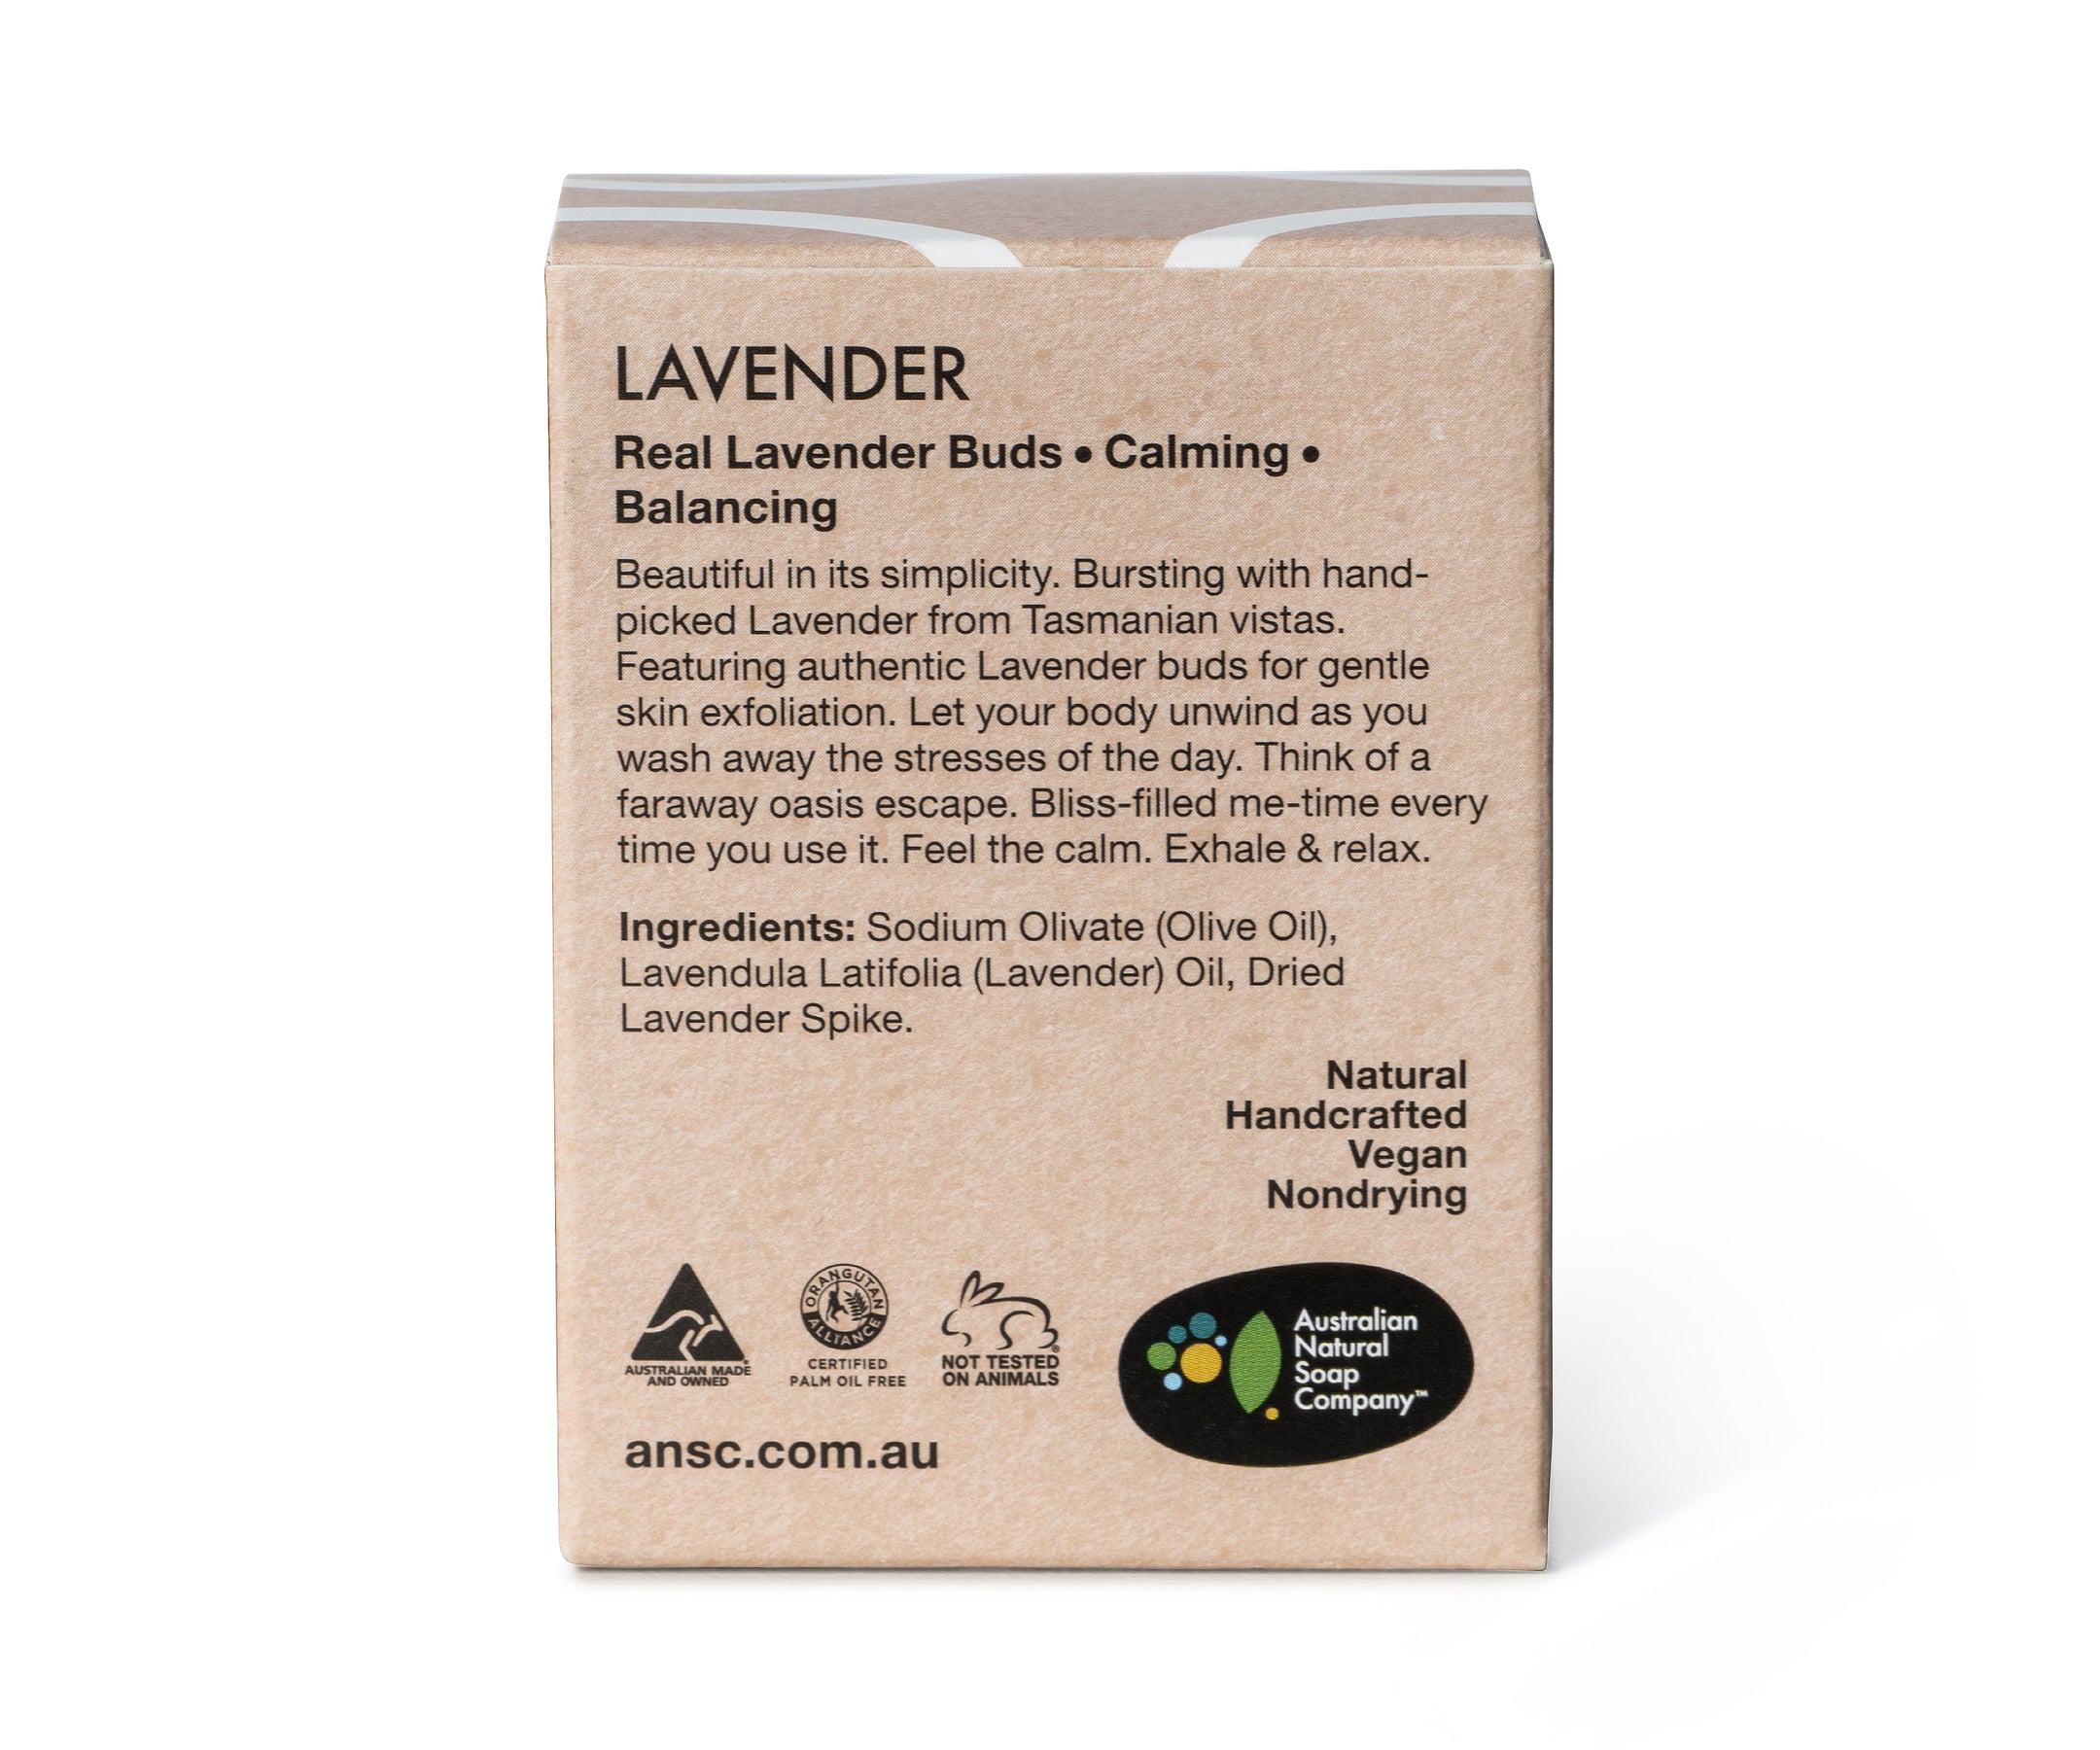 Australian Natural Soap Company handcrafted Lavender hand and body bar back of box